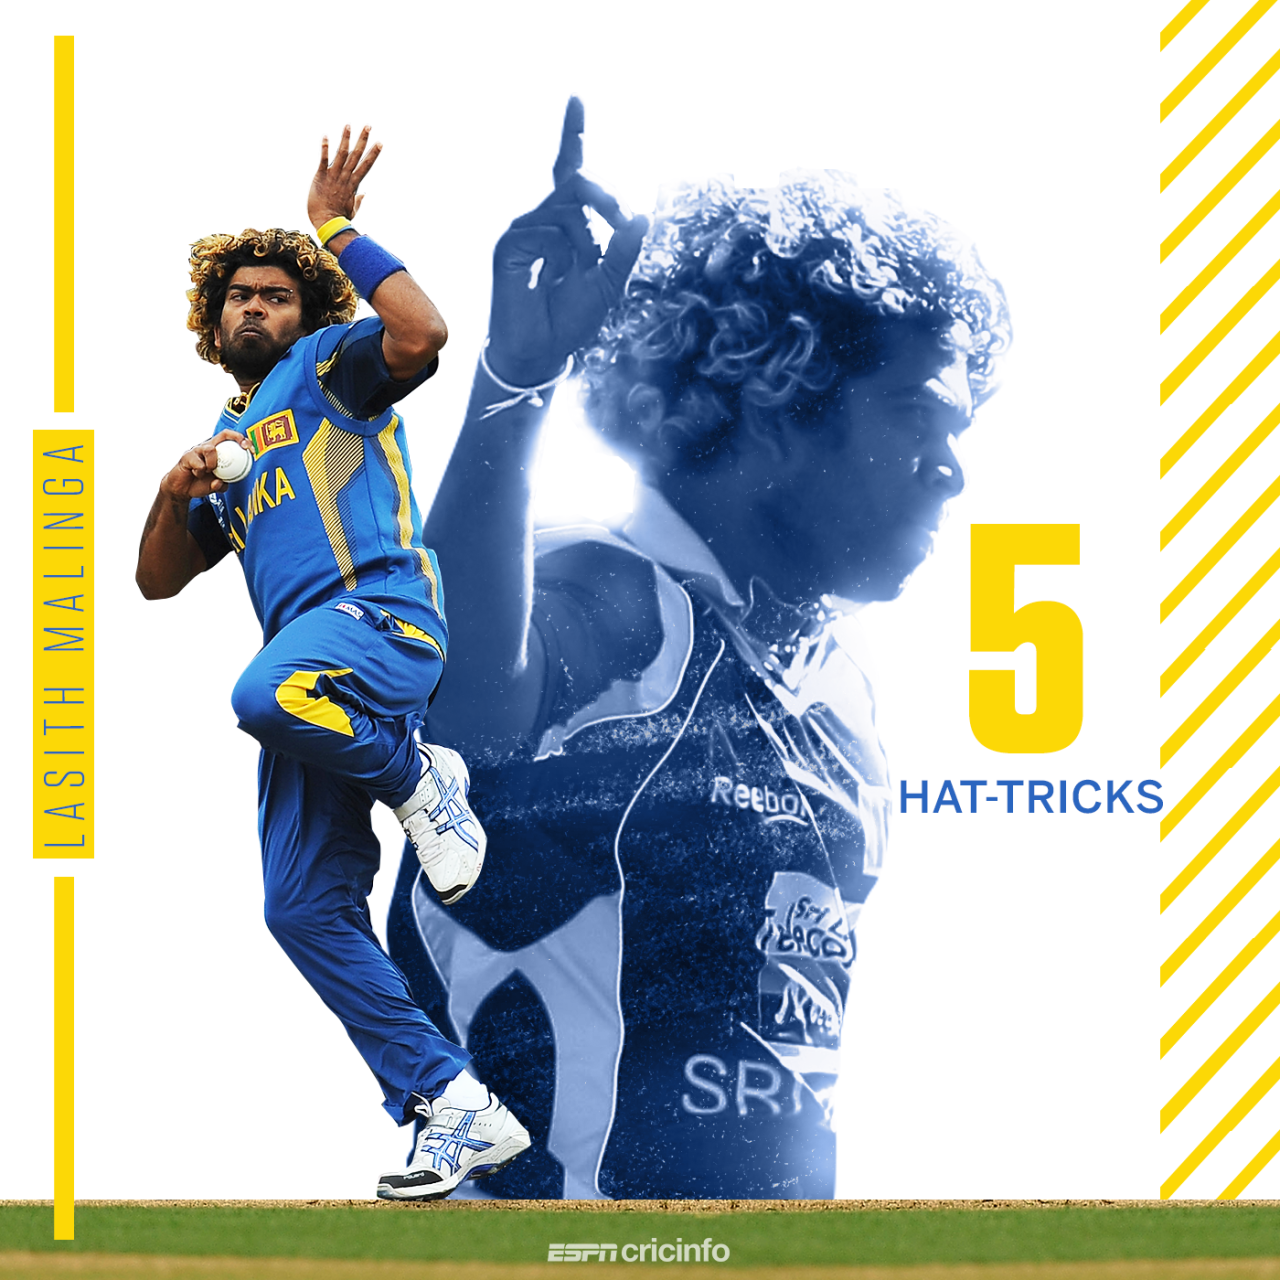 The hat-trick against New Zealand was Malinga's fifth in internationals, a world record